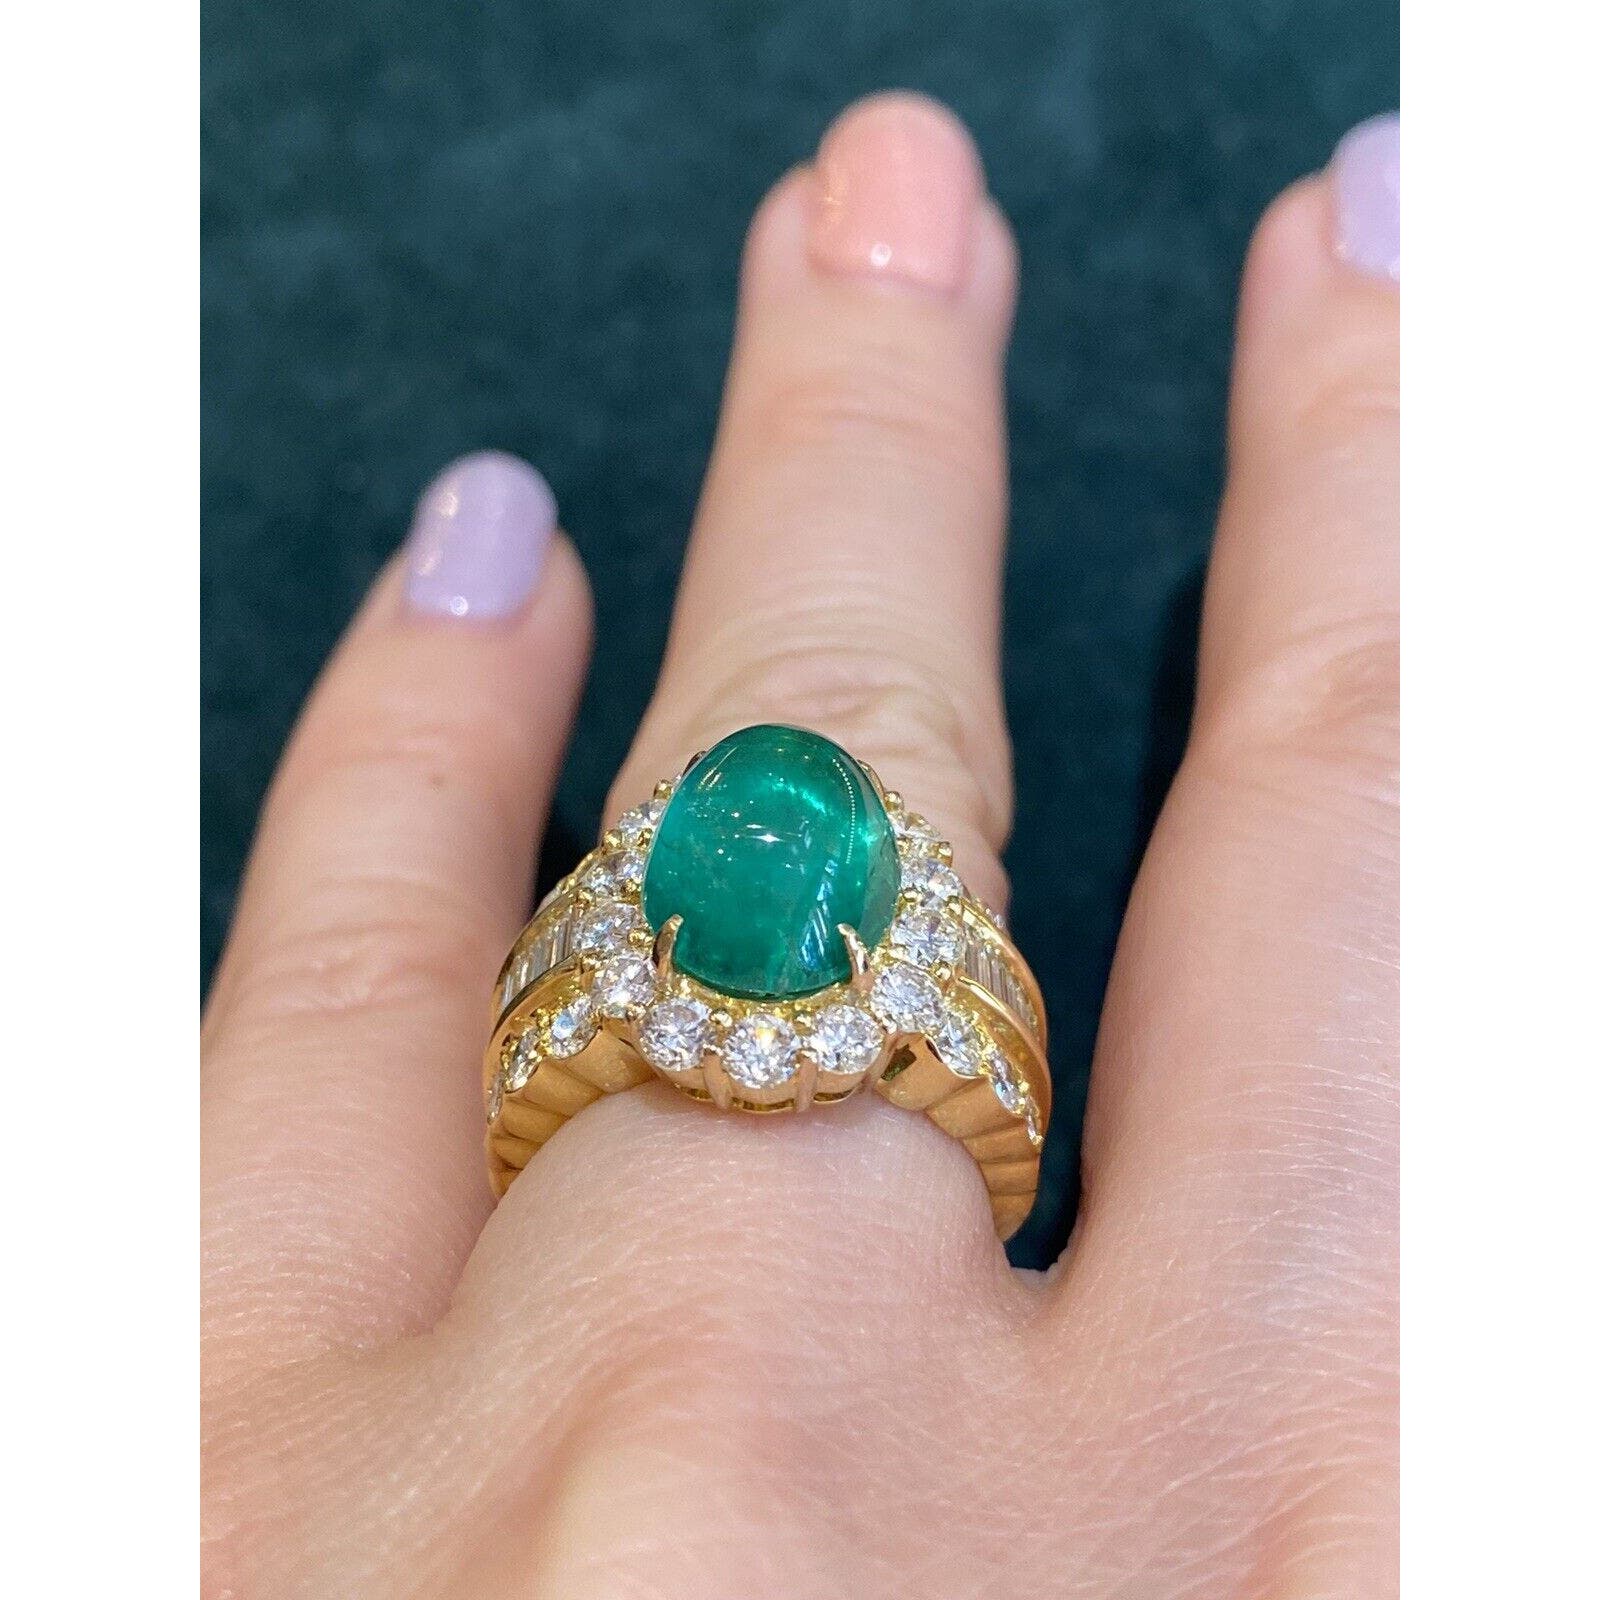 GIA 5.12ct Emerald Cabochon & Diamond Ring in 18k Yellow Gold - HM2222BR